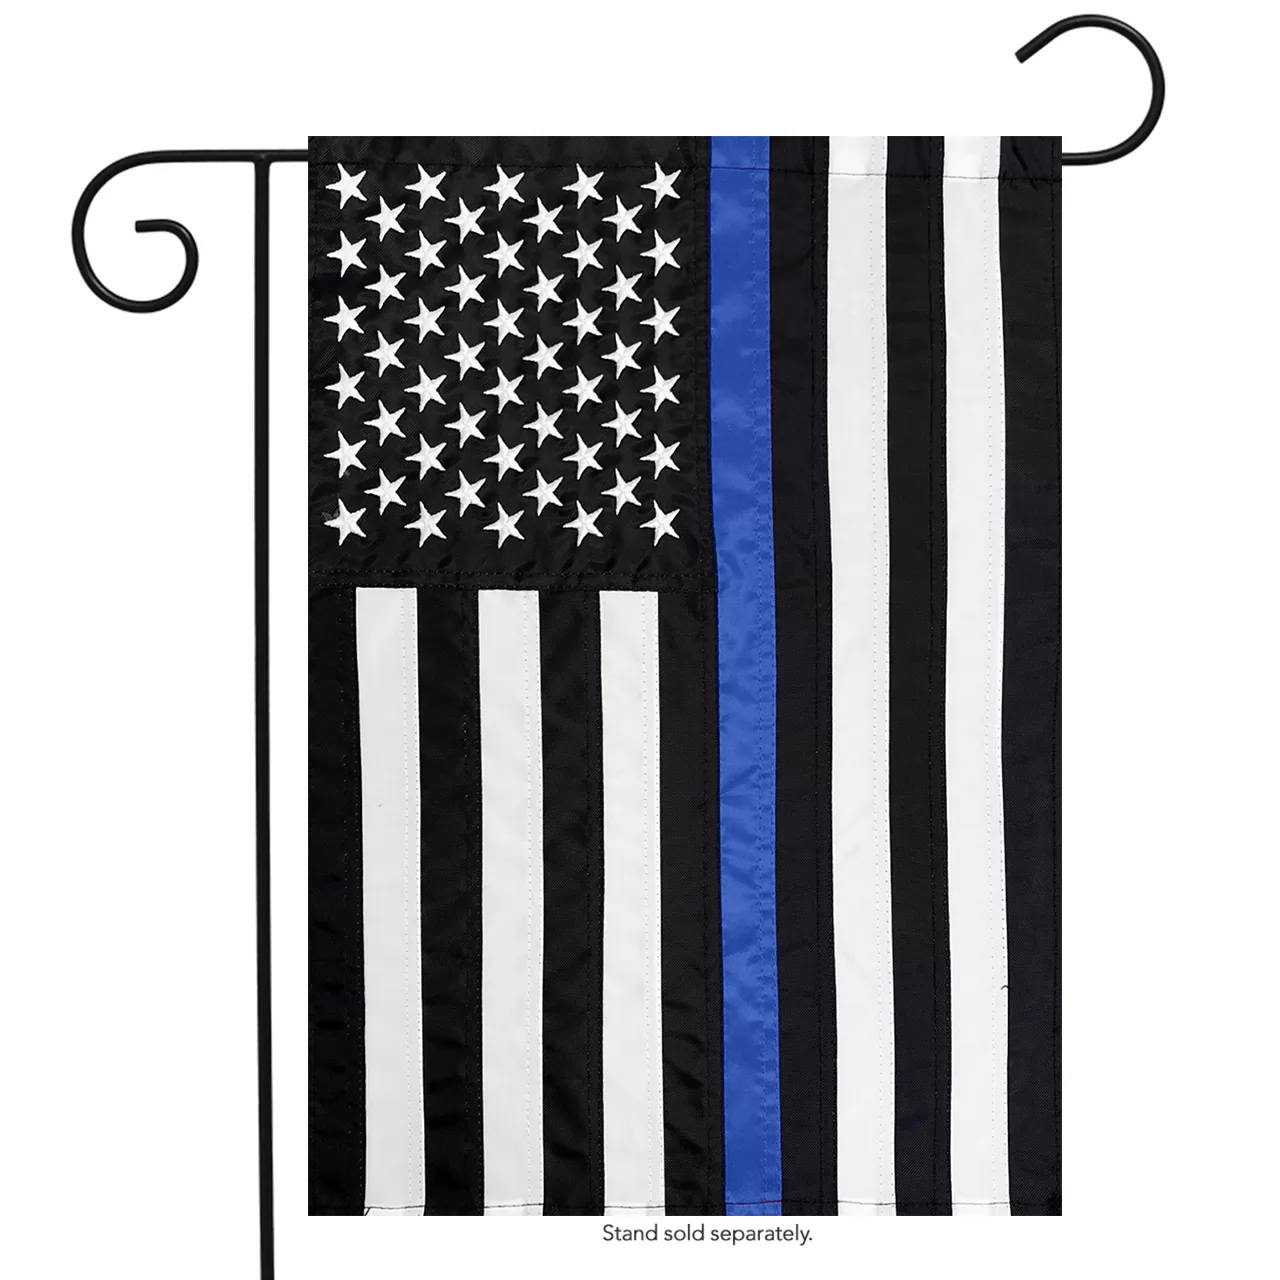 Homissor Classic Thin Blue Line Police Applique & Embroidered Garden Flag 12.5" x 18"